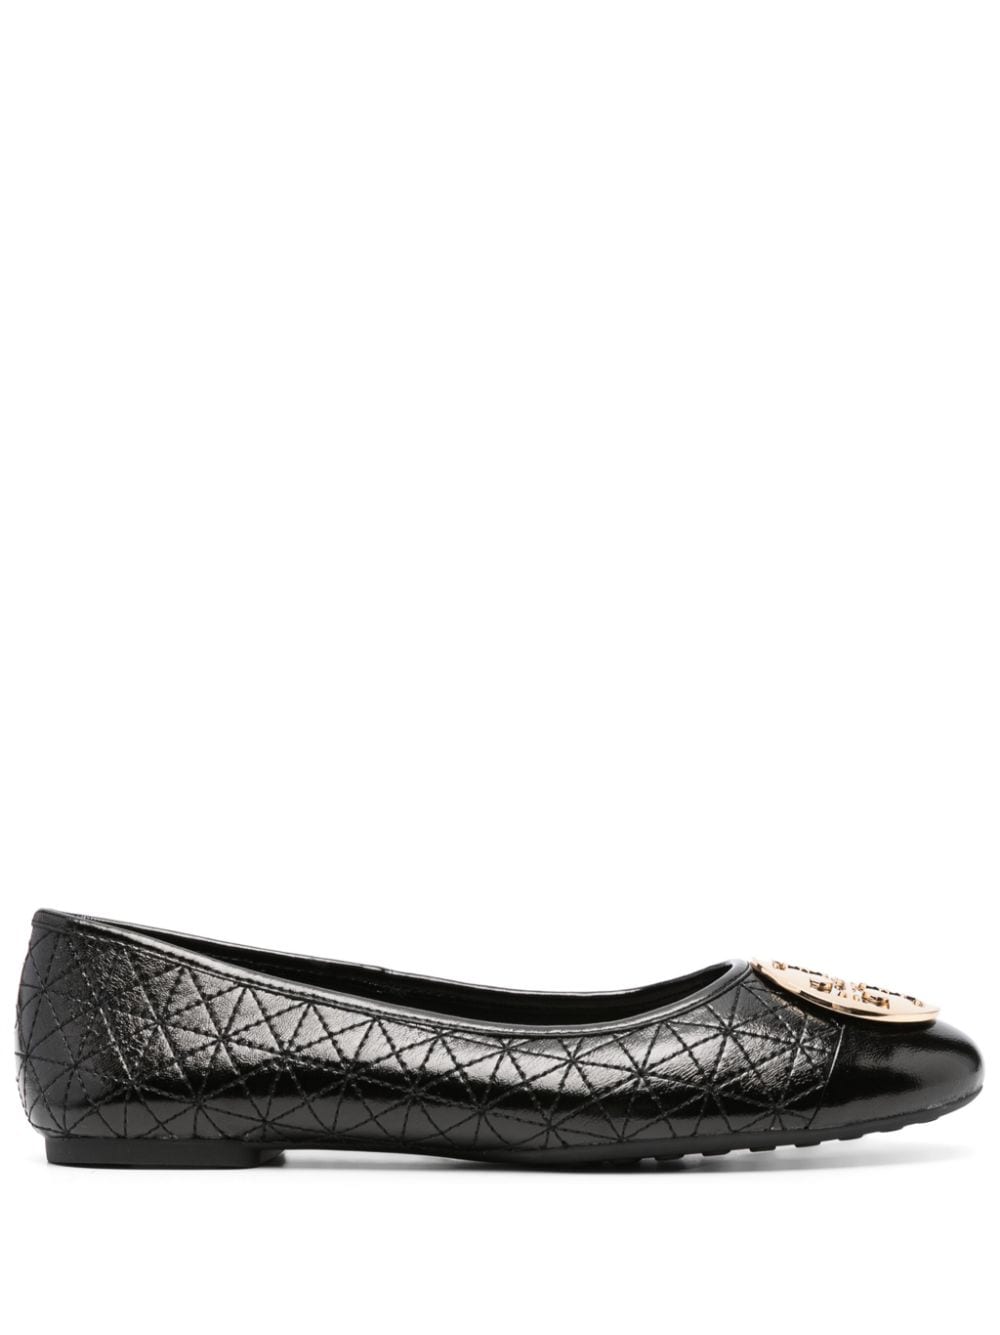 Tory Burch Claire Quilted Leather Ballerinas In Black